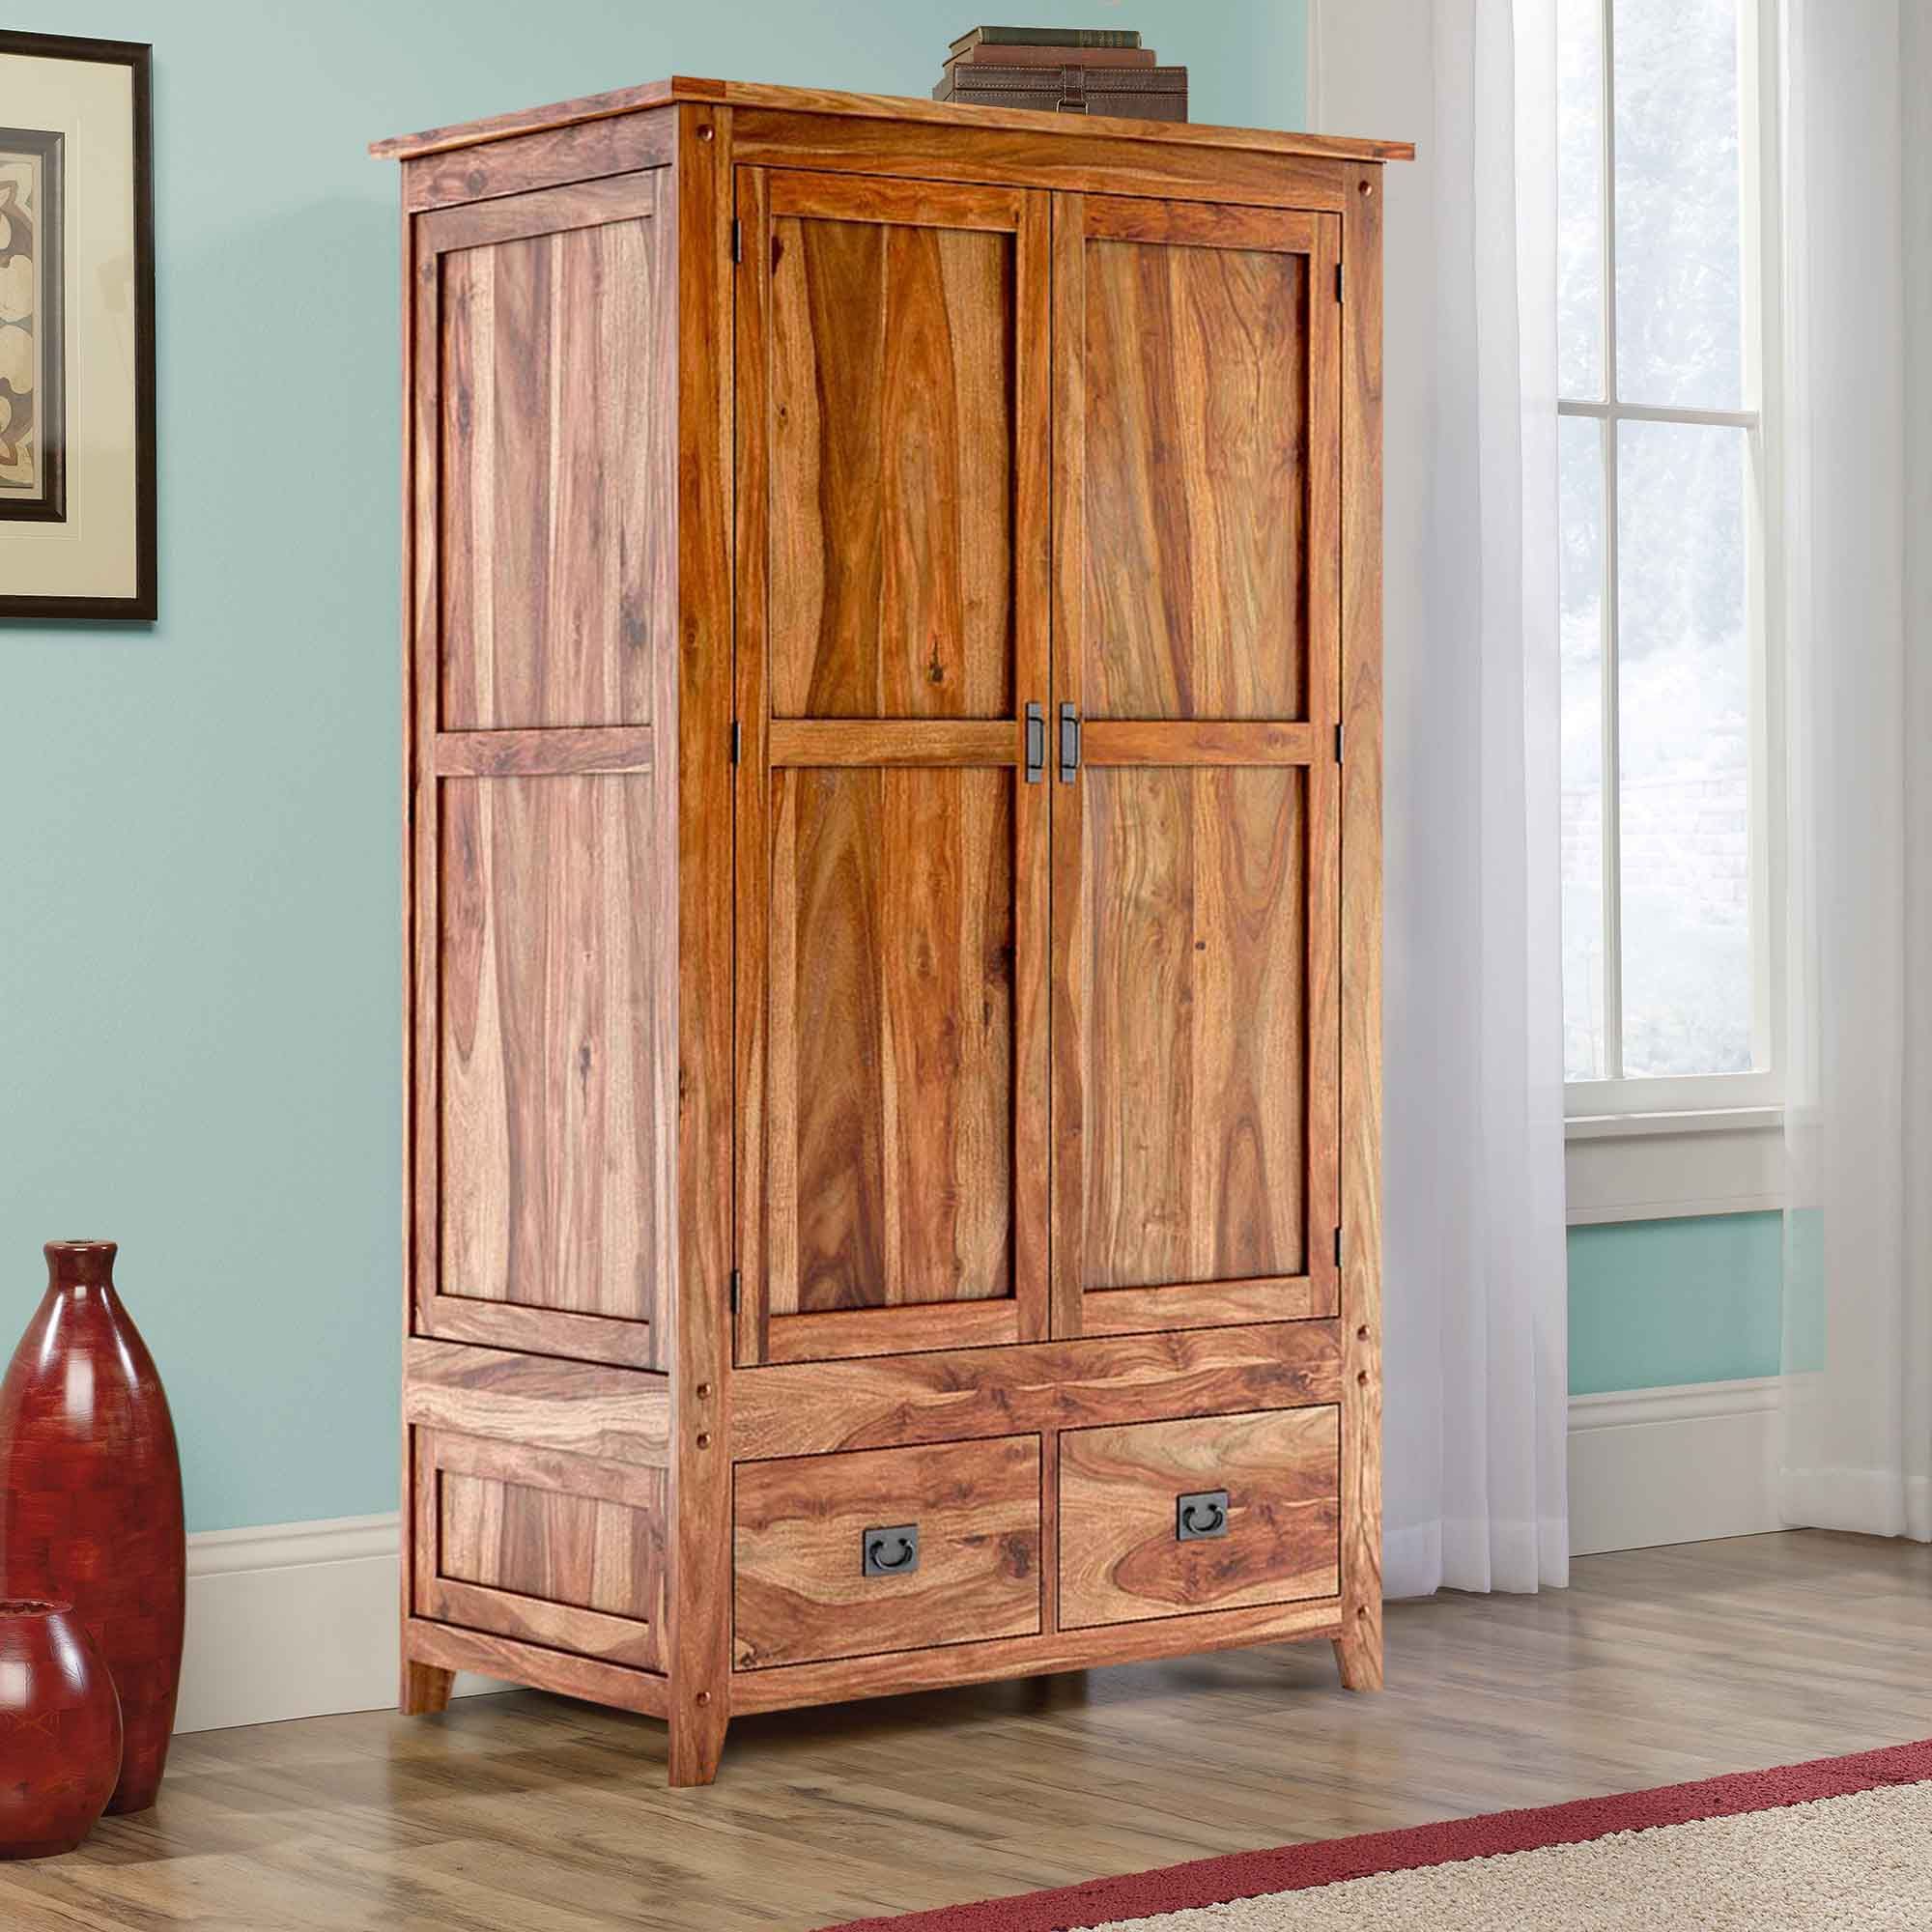 Delaware Farmhouse Solid Wood Wardrobe Armoire With Drawers Intended For Cheap Solid Wood Wardrobes (View 7 of 20)